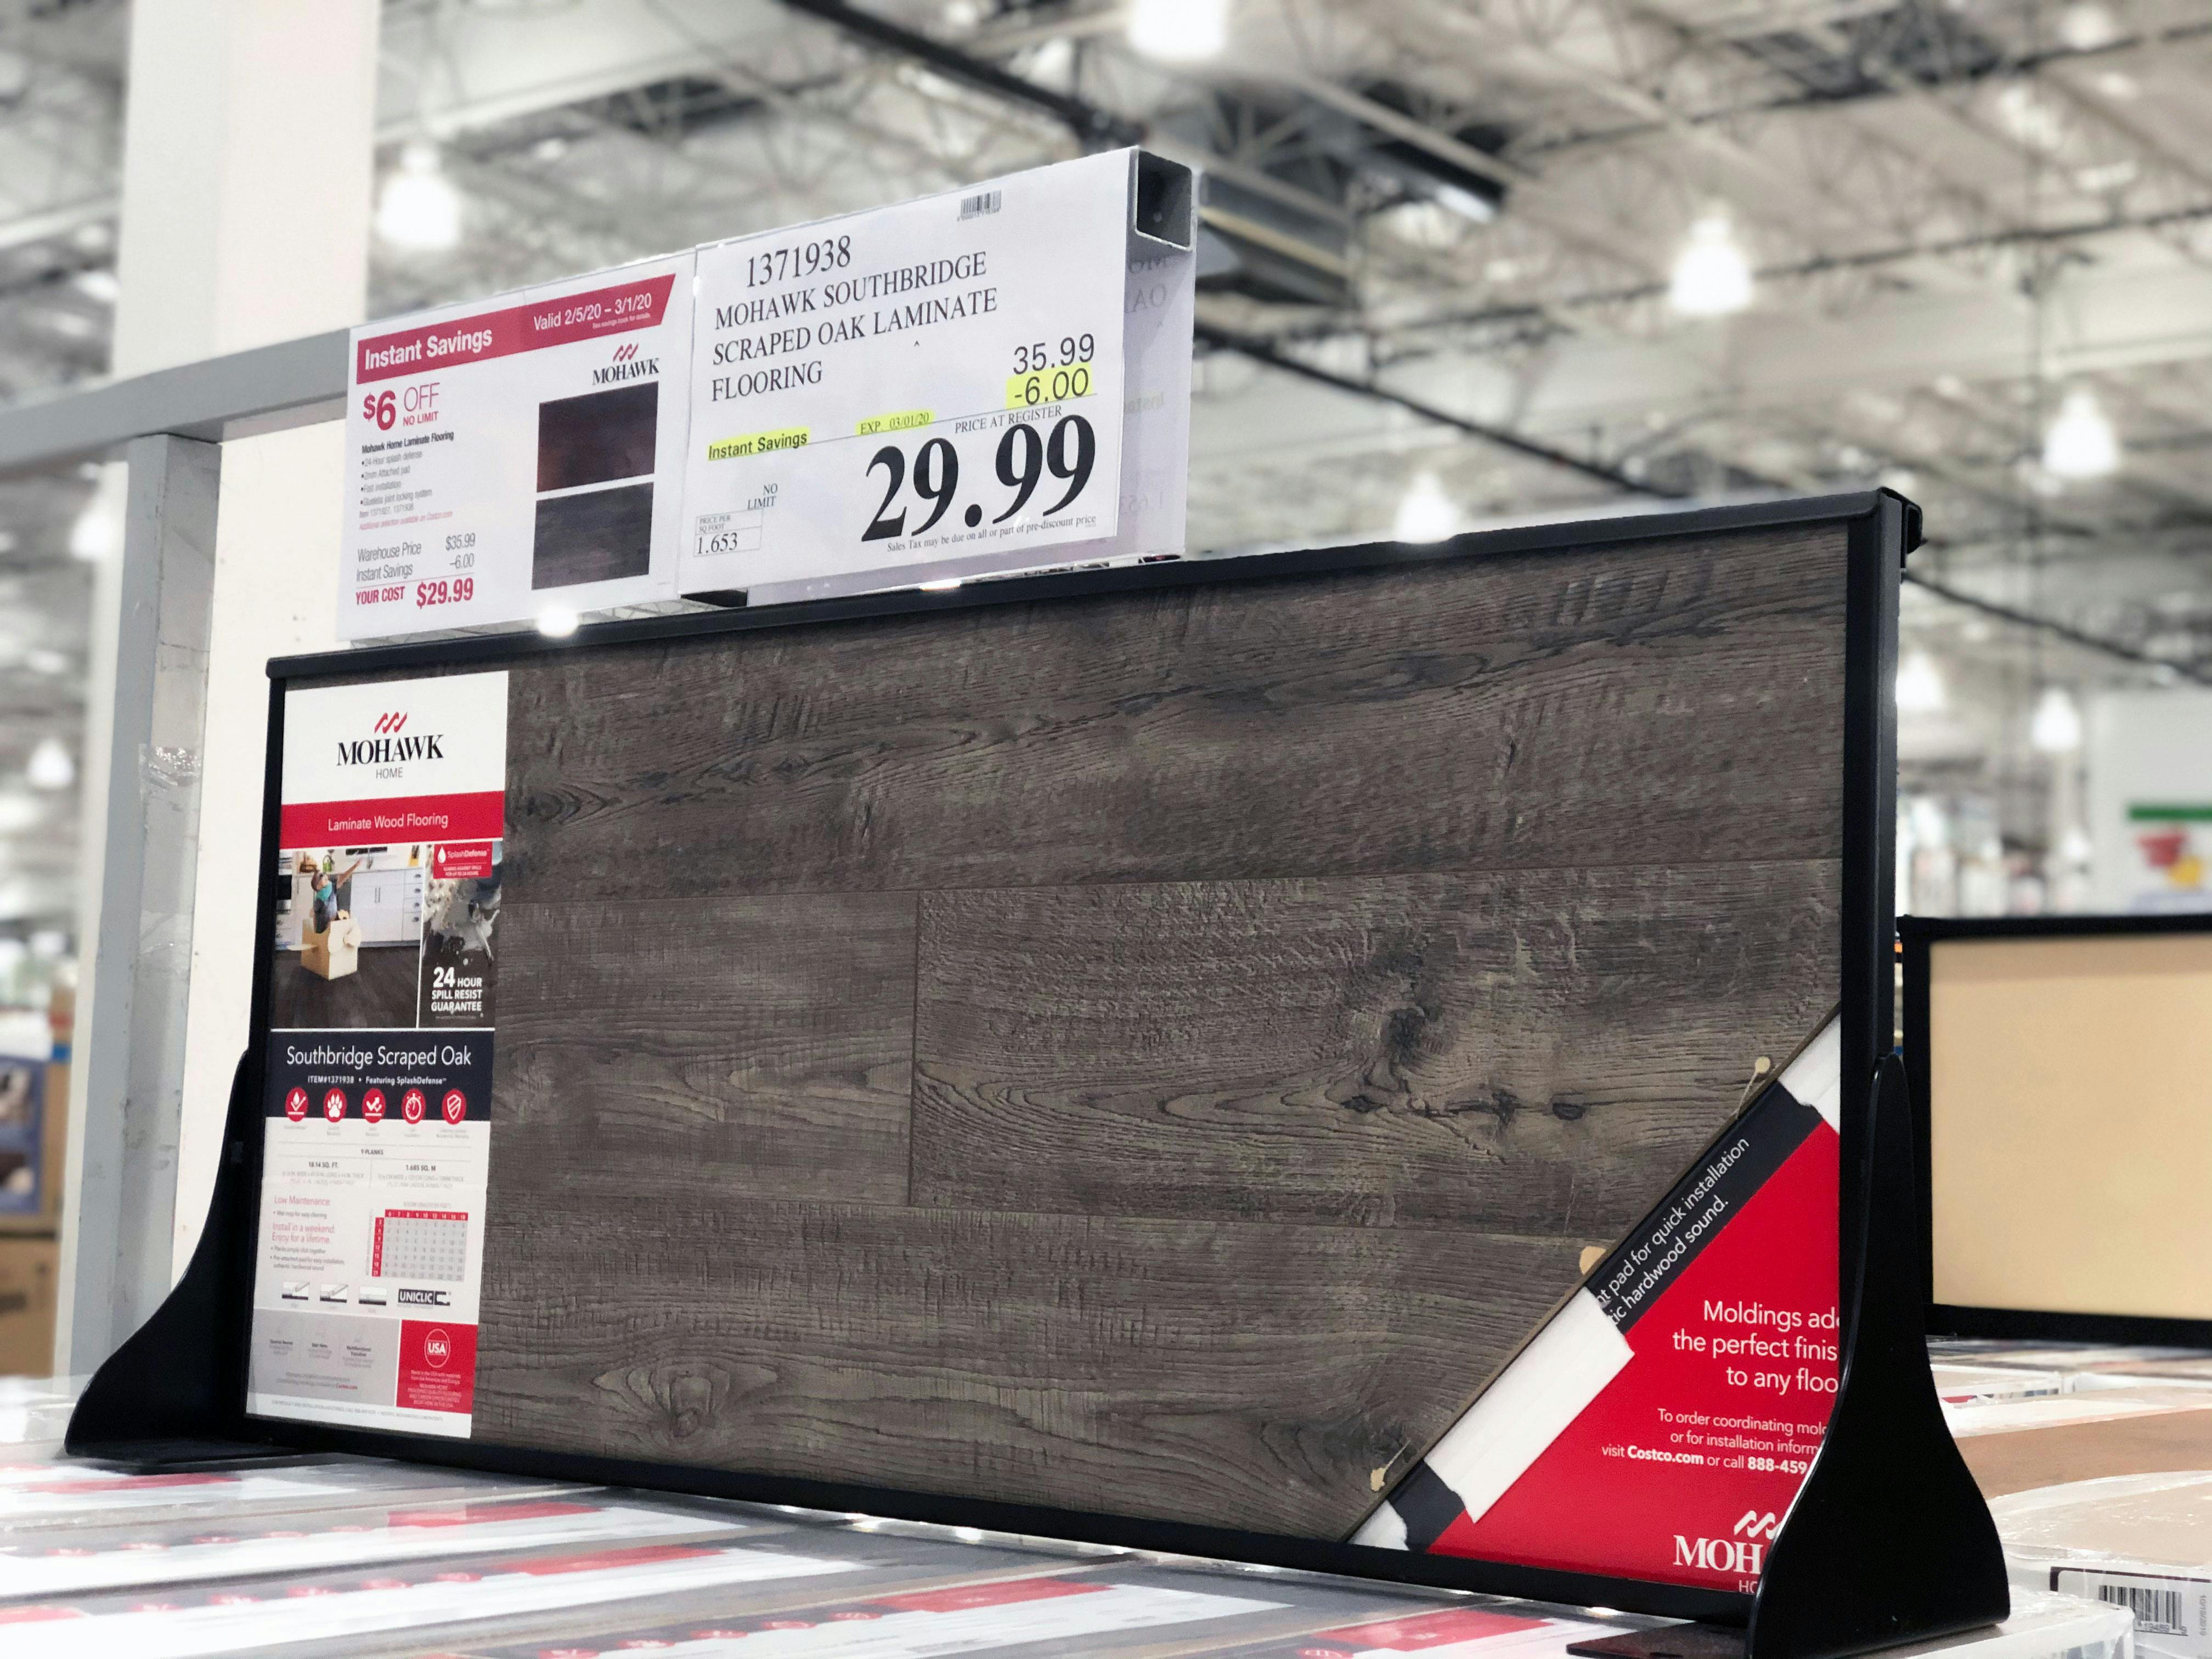 Laminate Wood Flooring 1 65 Sq Ft At Costco Pad Attachment The Krazy Coupon Lady